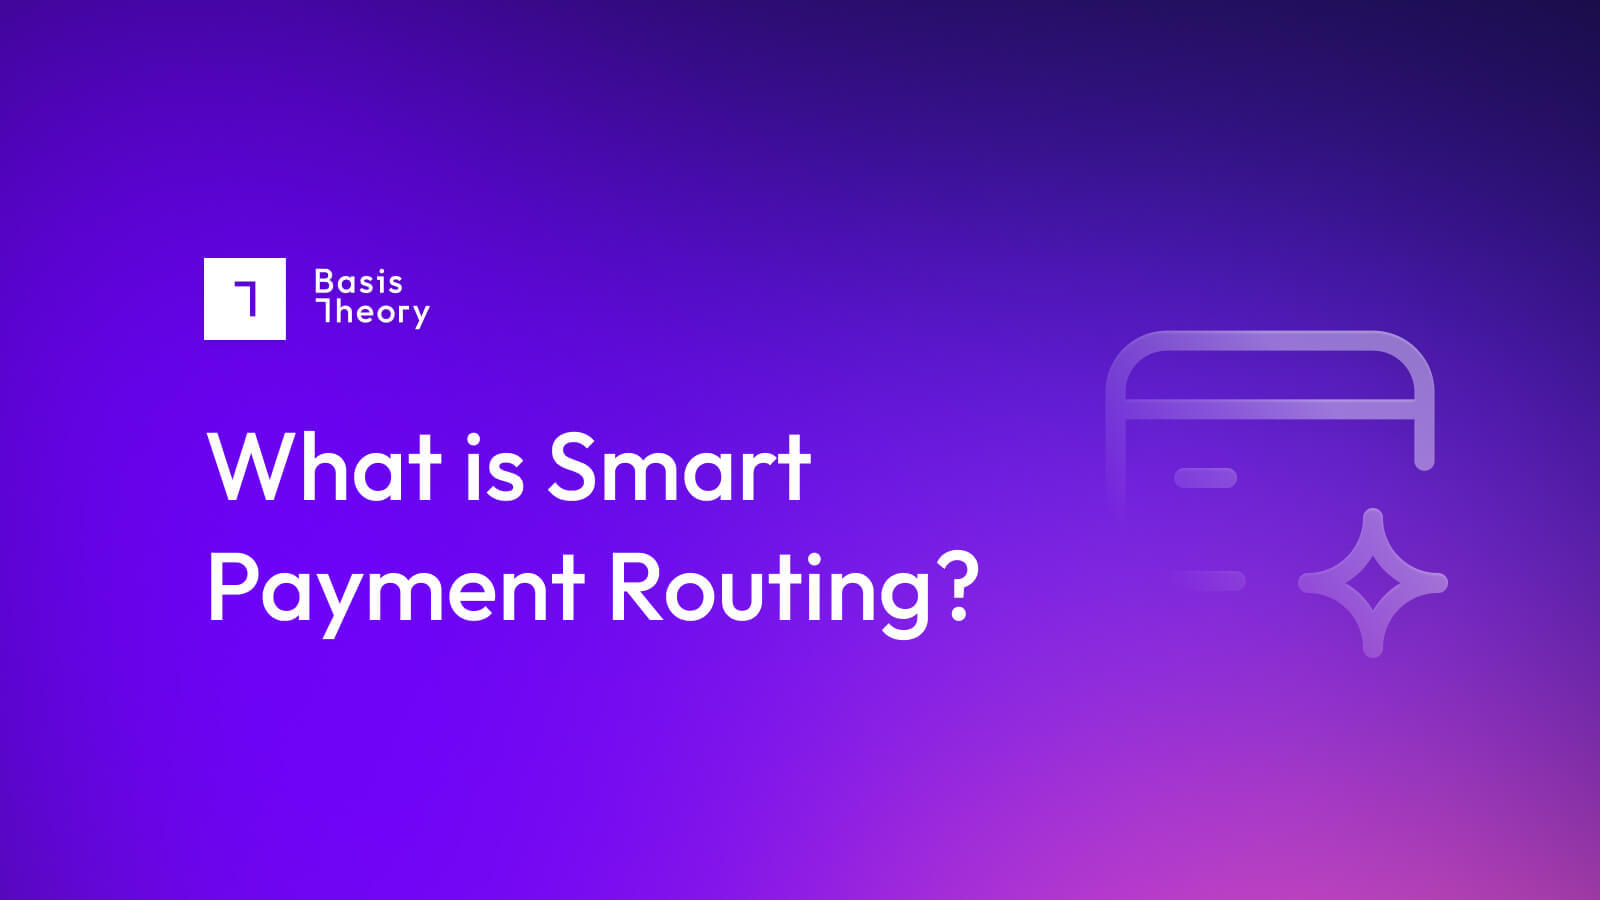 What is smart payment routing?